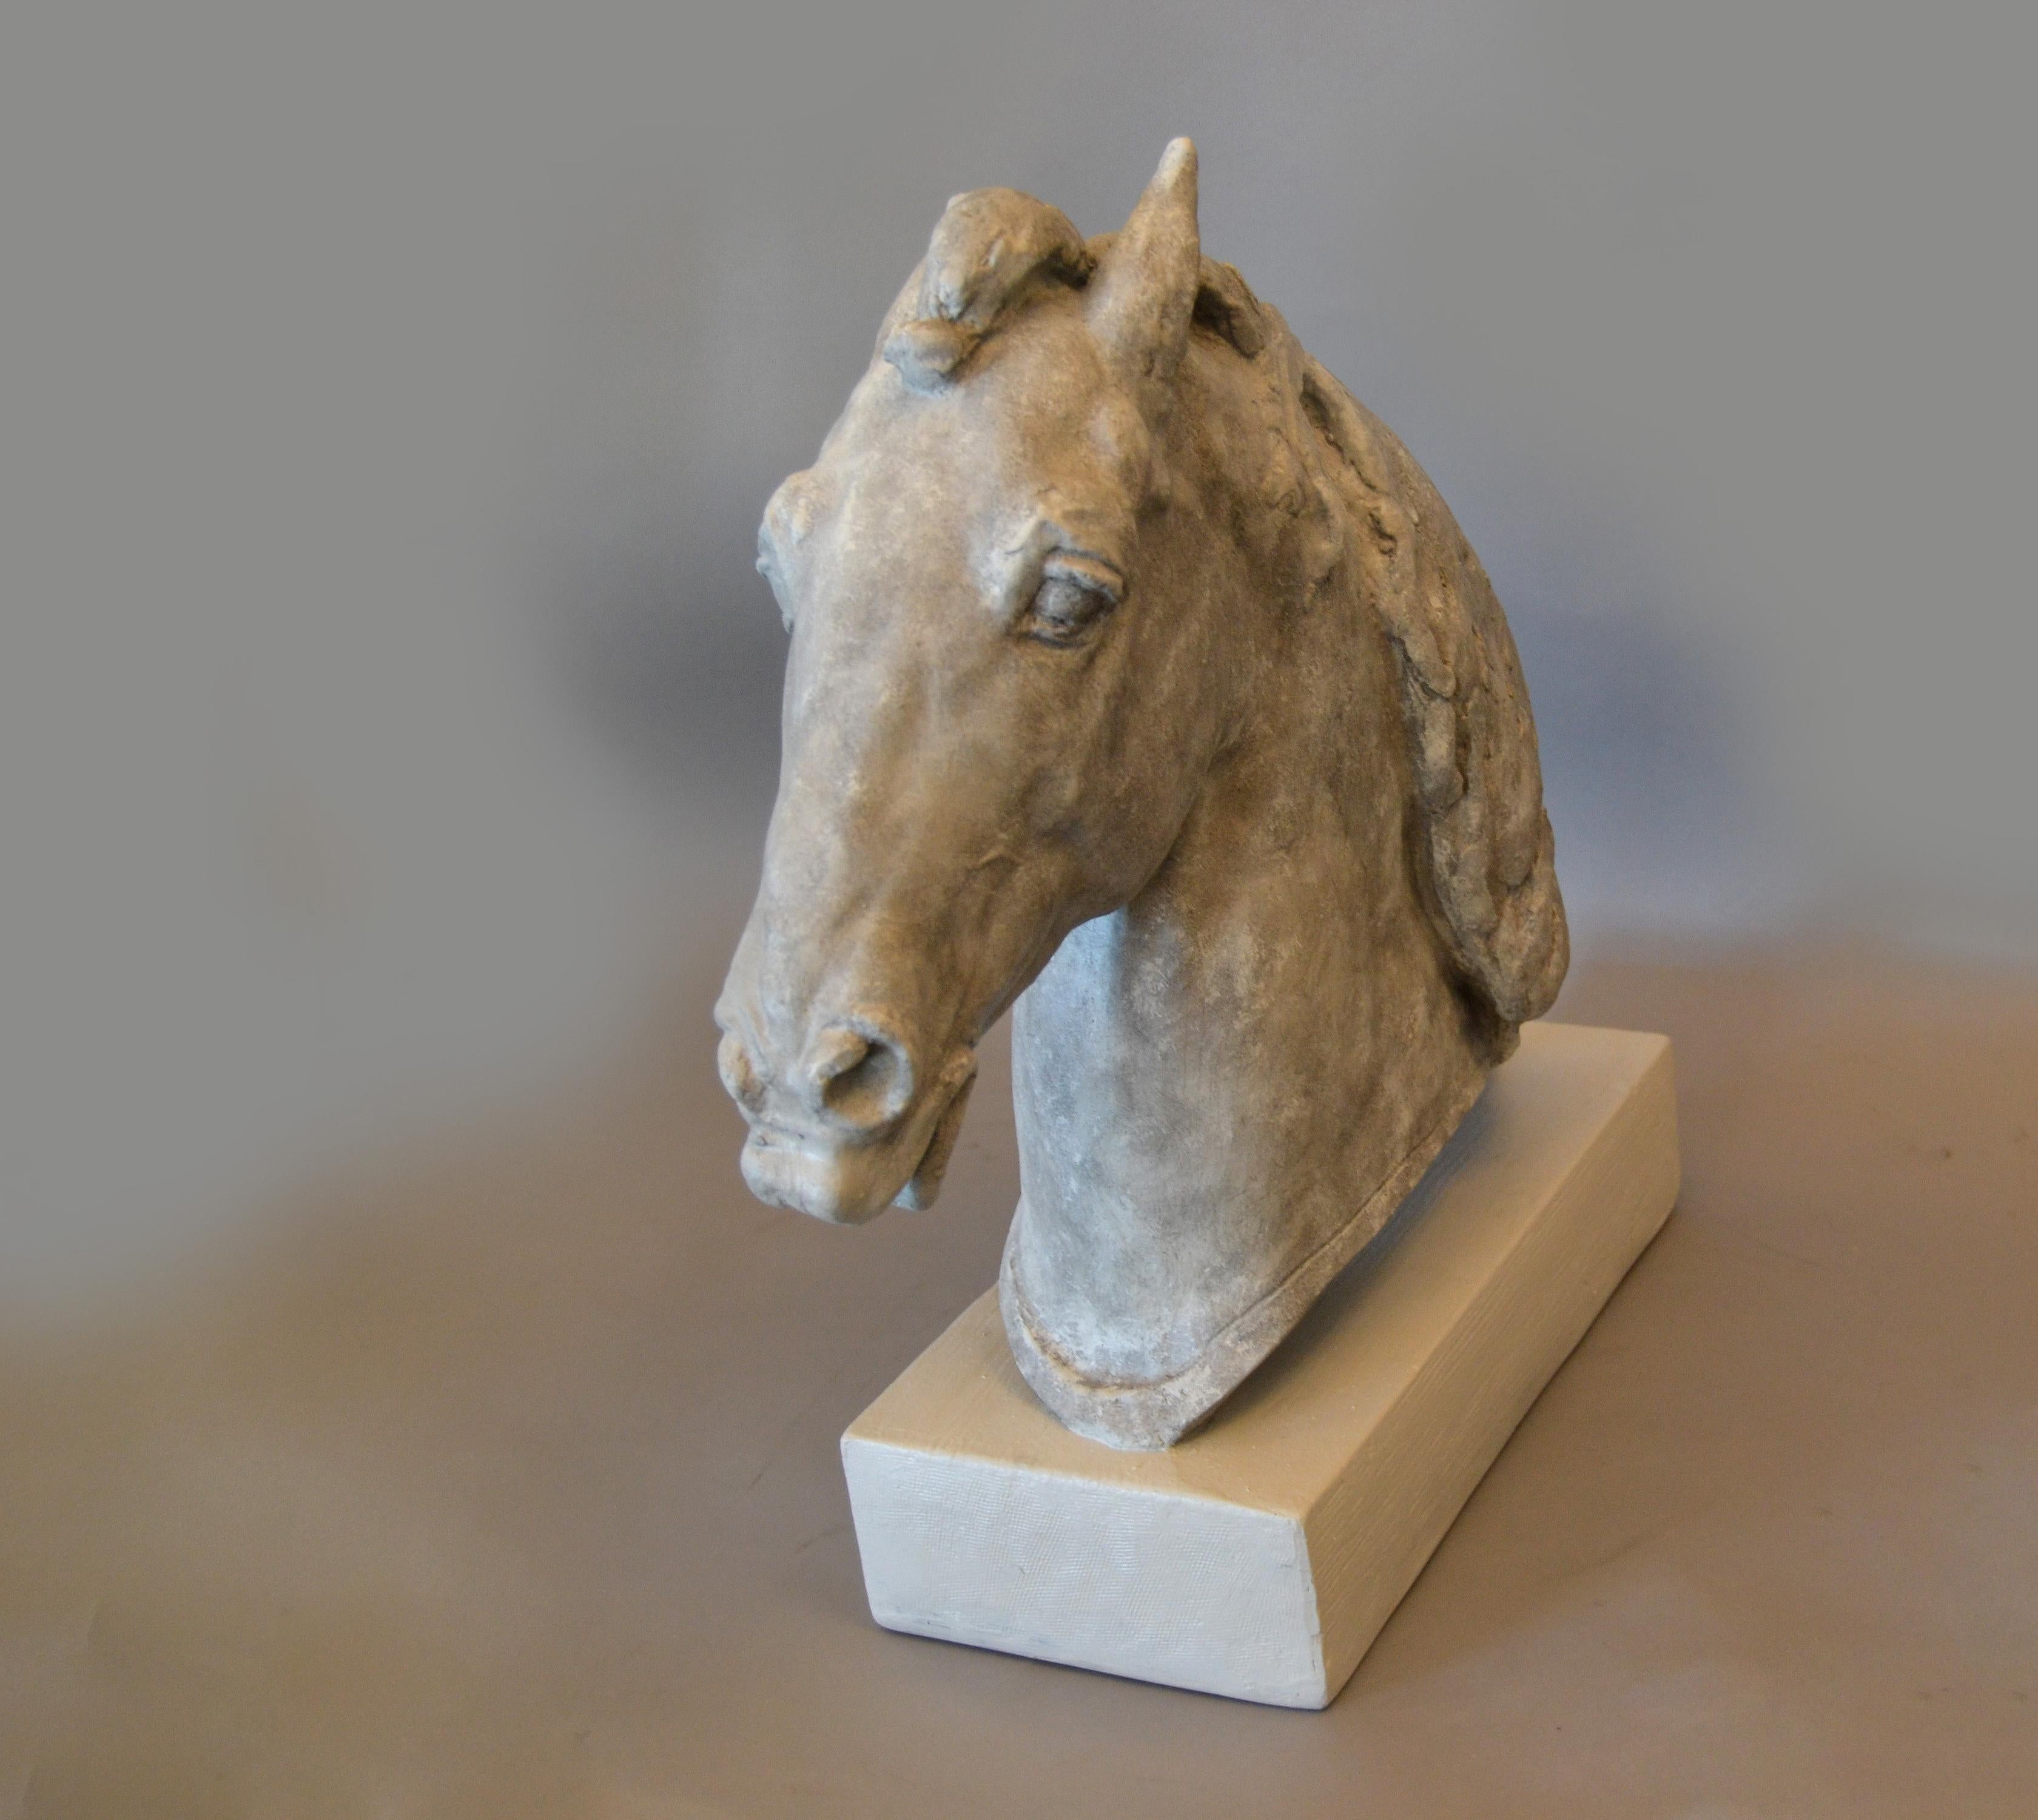 Graceful Mid-Century Modern plaster horse head sculpture on a wooden base.
The horse head has a grey finish and is attached to the white base.
It is signed and dated at the base, '1961 A. Lava'.